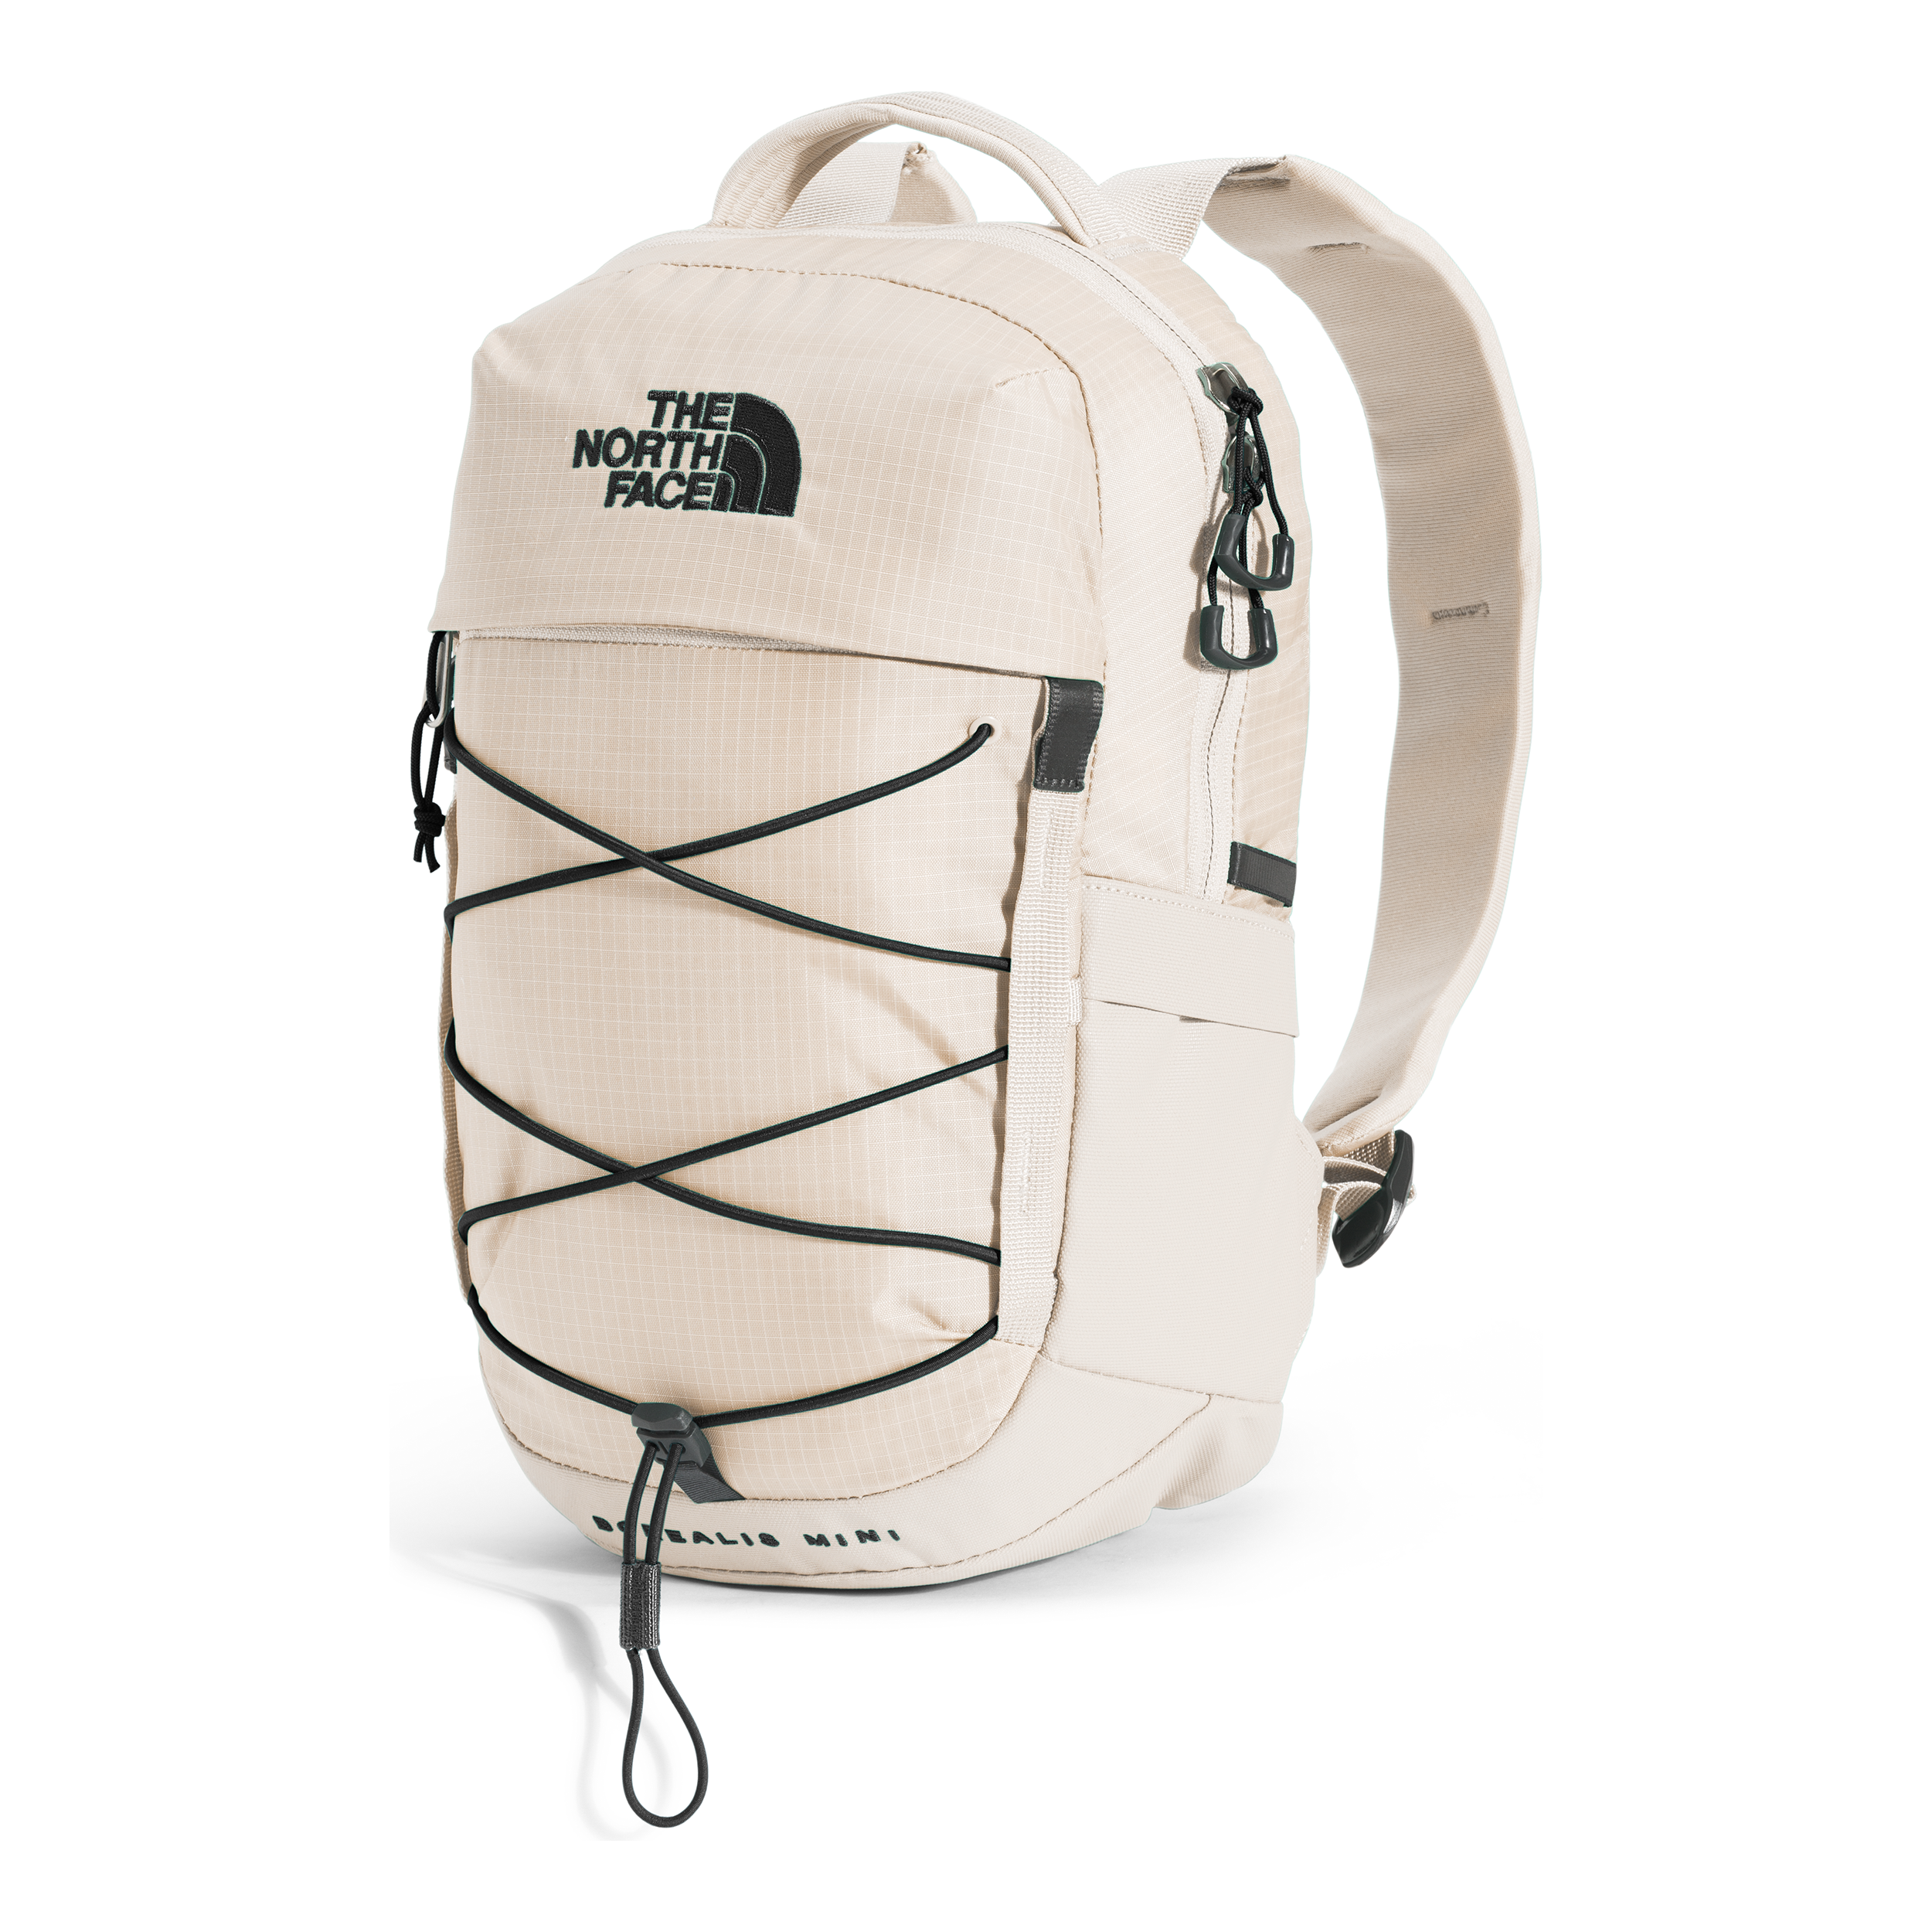 The North Face Borealis Mini Backpack Review